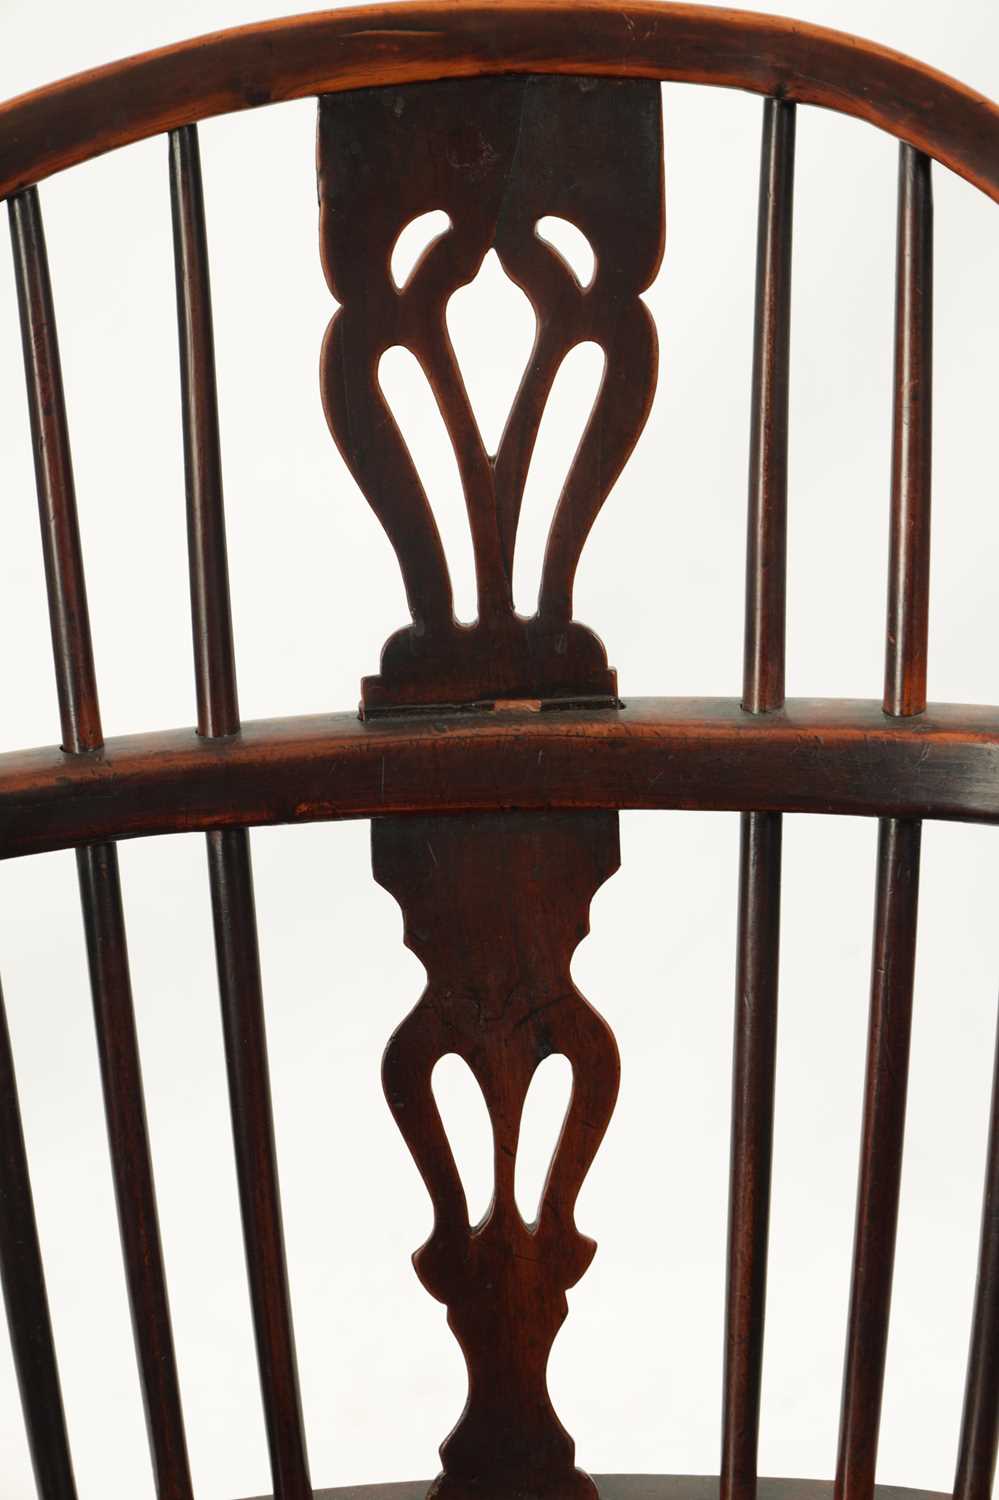 AN EARLY 19TH CENTURY YEW WOOD LOW BACK WINDSOR CHAIR - Image 4 of 6